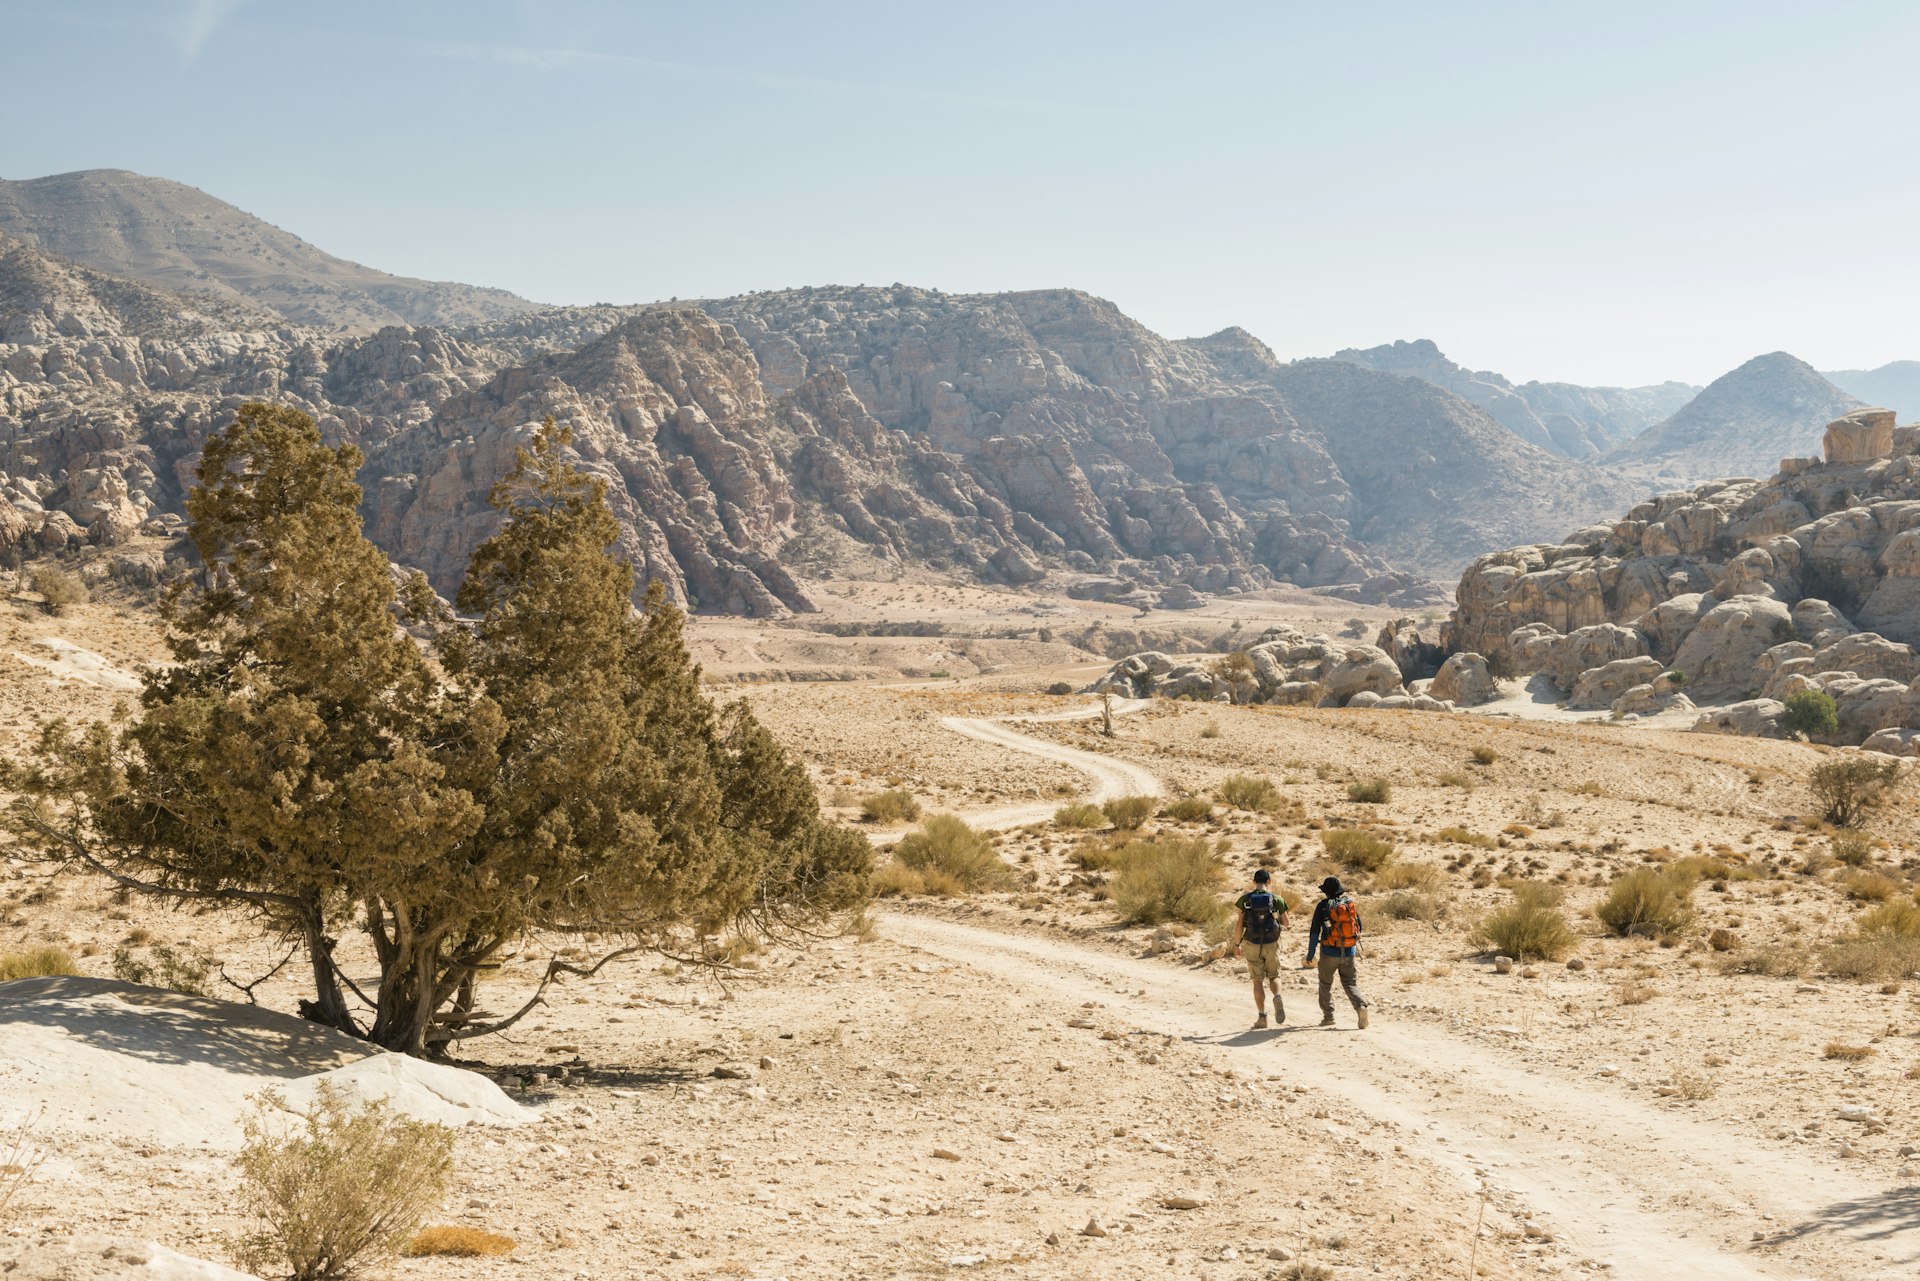 Two hikers on the Jordan Trail through rock formations in Bedouin country to the north of Petra, Jordan, Middle East